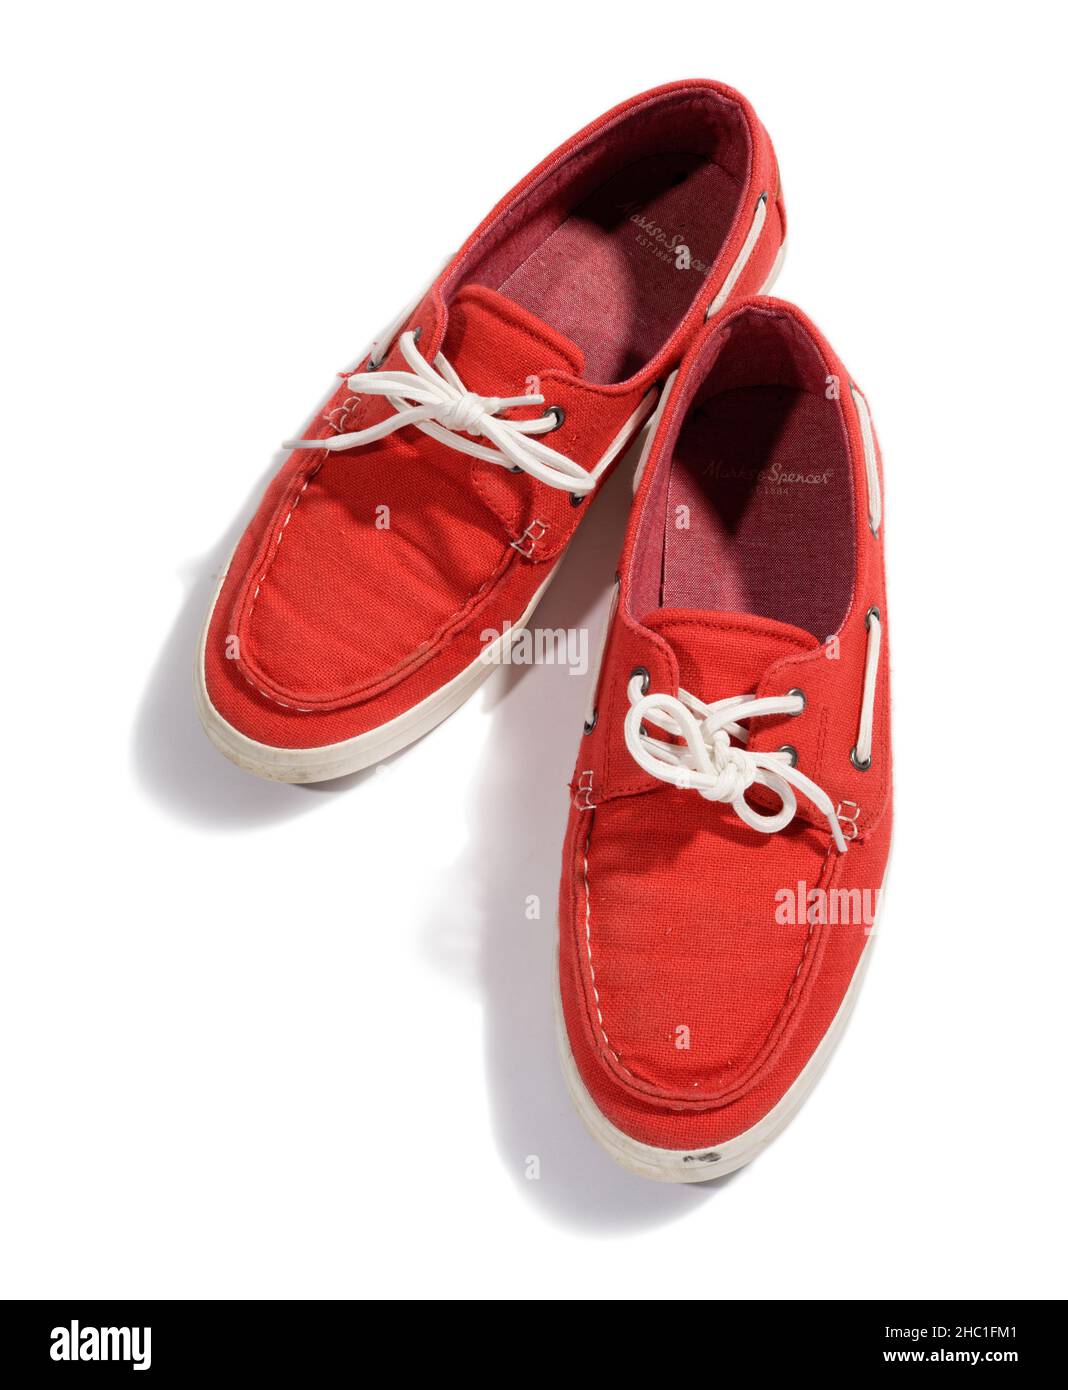 A pair of red deck shoes Stock Photo